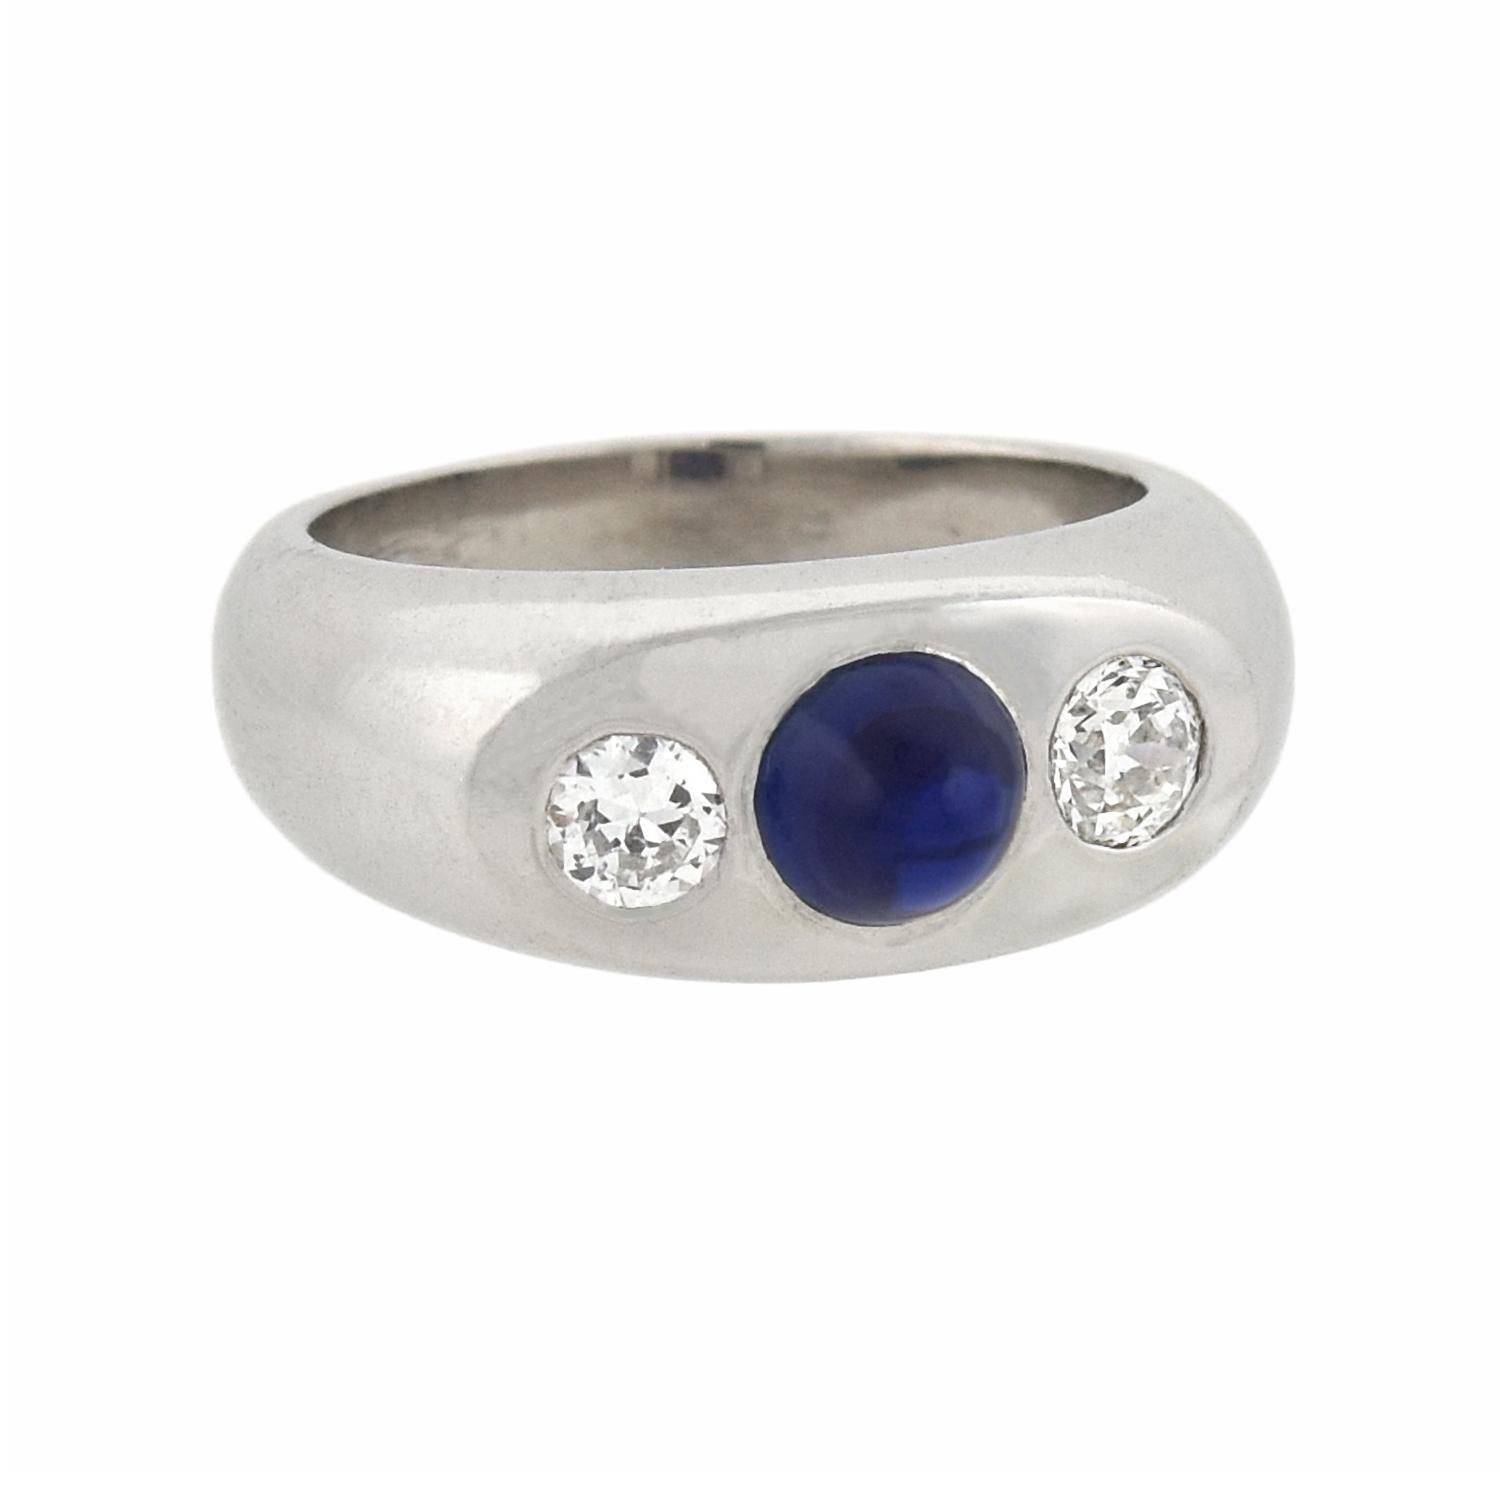 A absolutely stunning diamond and sapphire 3-stone ring from the Art Deco (ca1920s) era! Crafted in platinum, this fabulous piece features a bold 3-stone design comprised of two diamonds and a single sapphire. The sapphire, which is bezel set in the